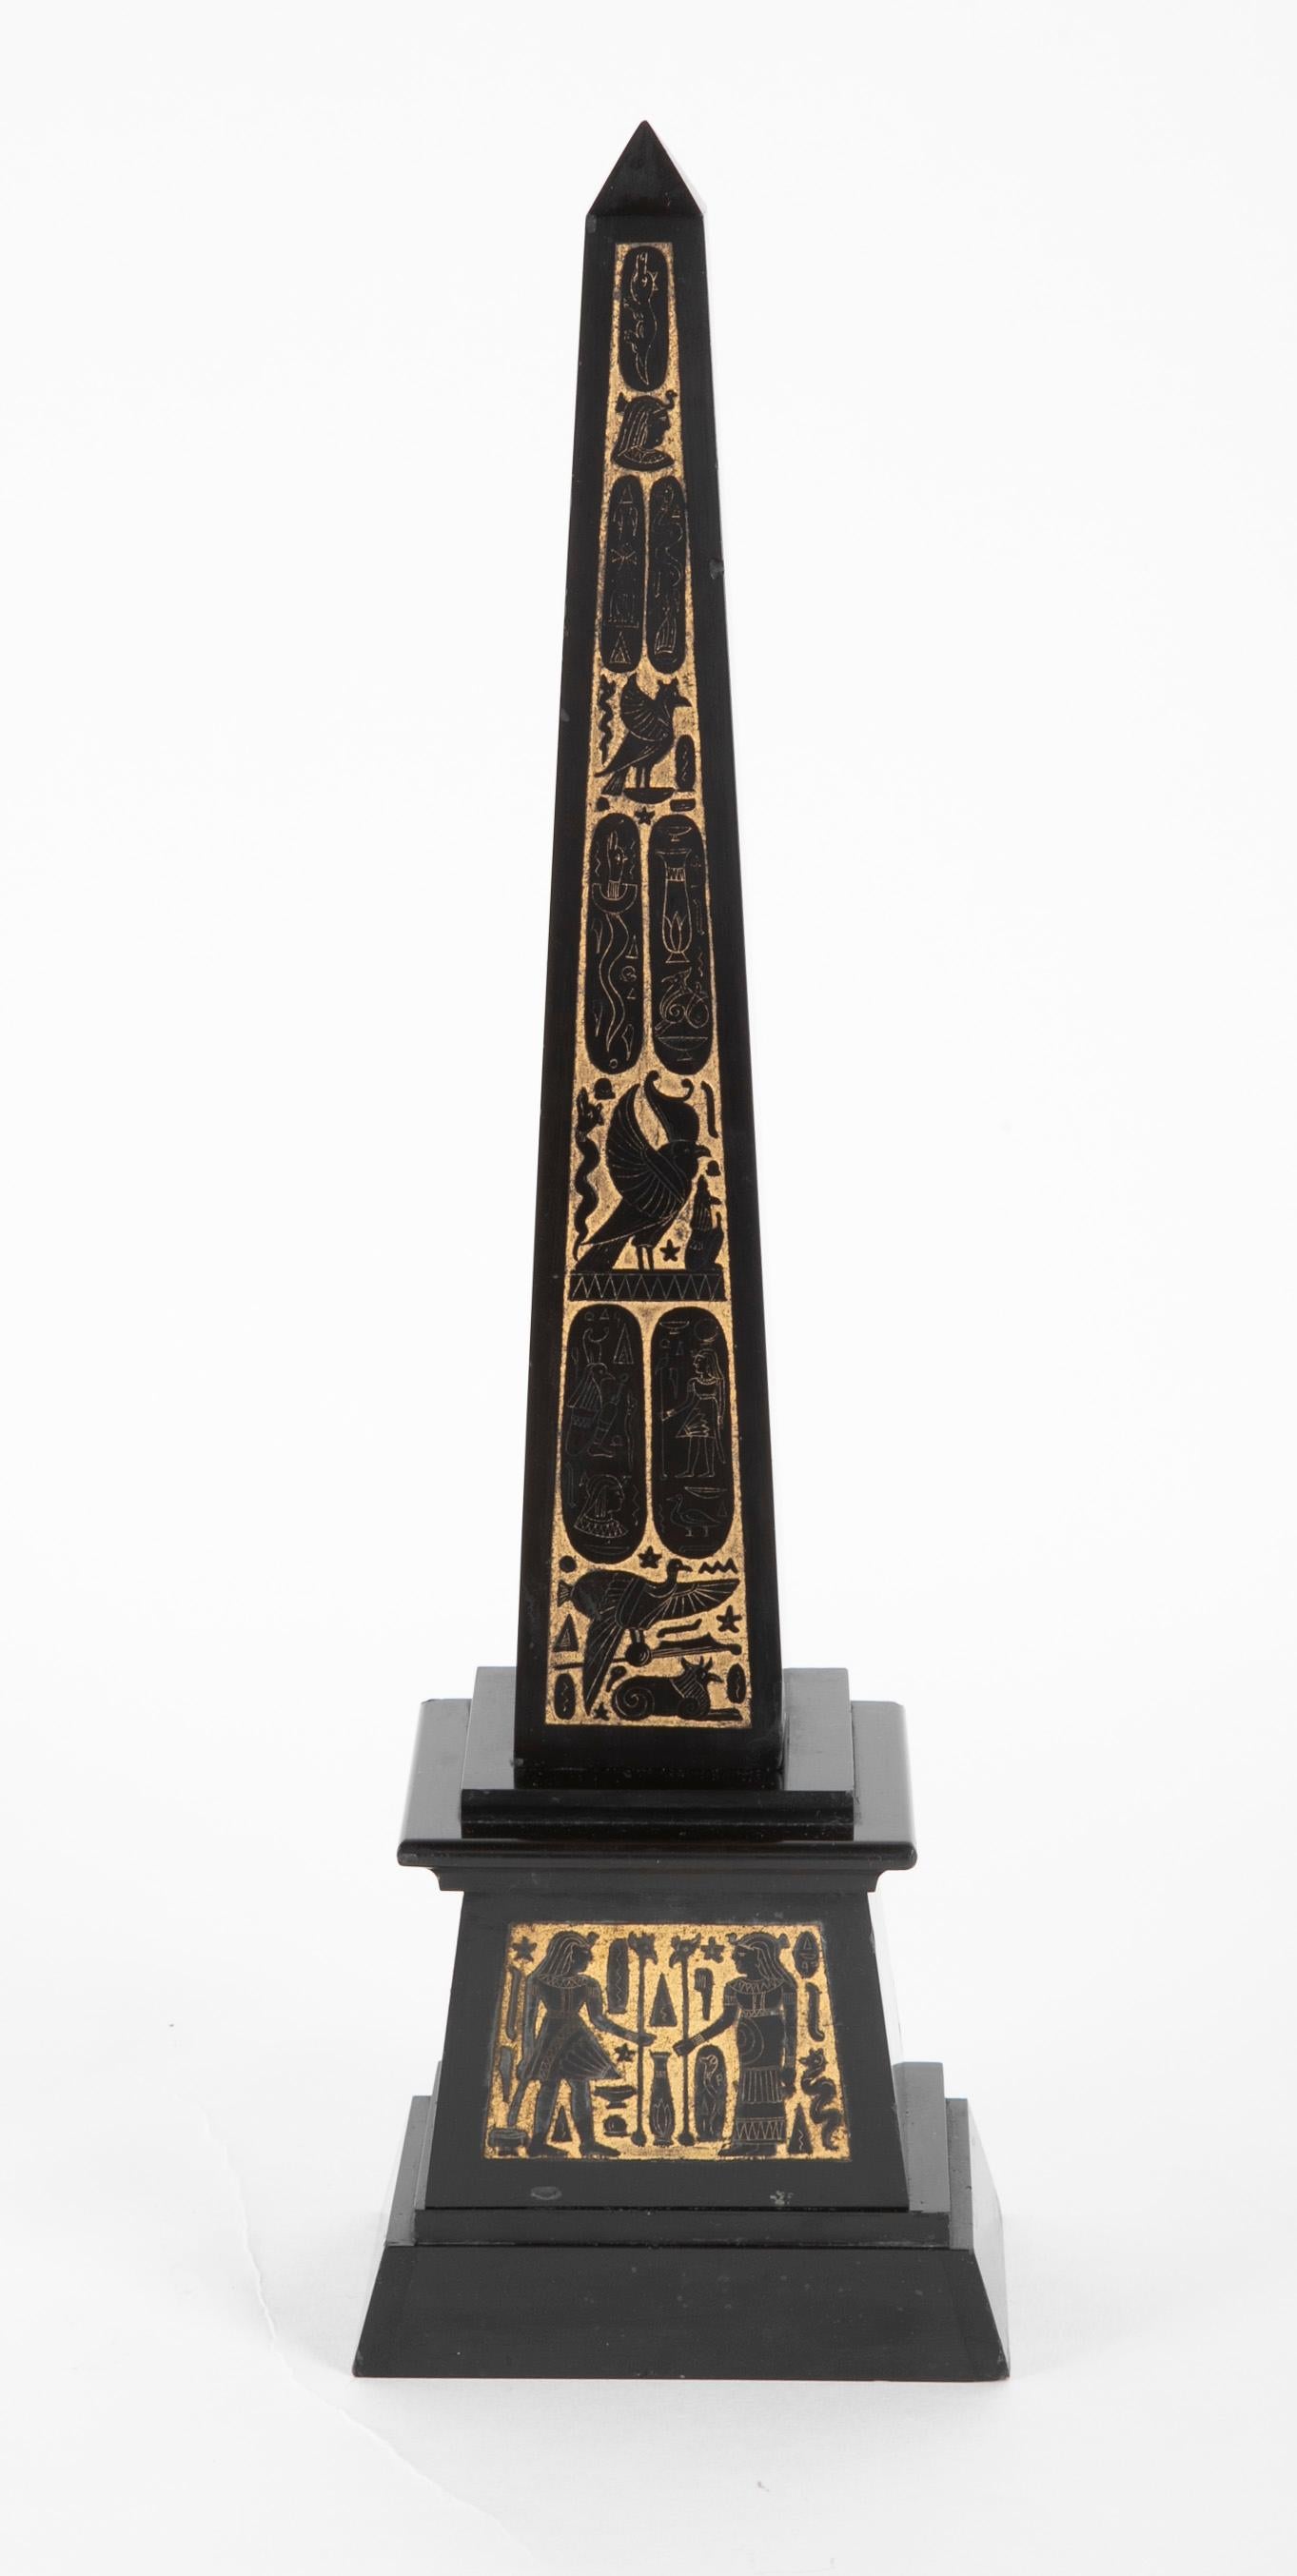 19th century Grand Tour Egyptian Revival carved and polished black slate obelisk, the front decorated with very fine incised hieroglyphic designs which have been accented with gold leaf. The obelisk is raised on a stepped base with incised details.